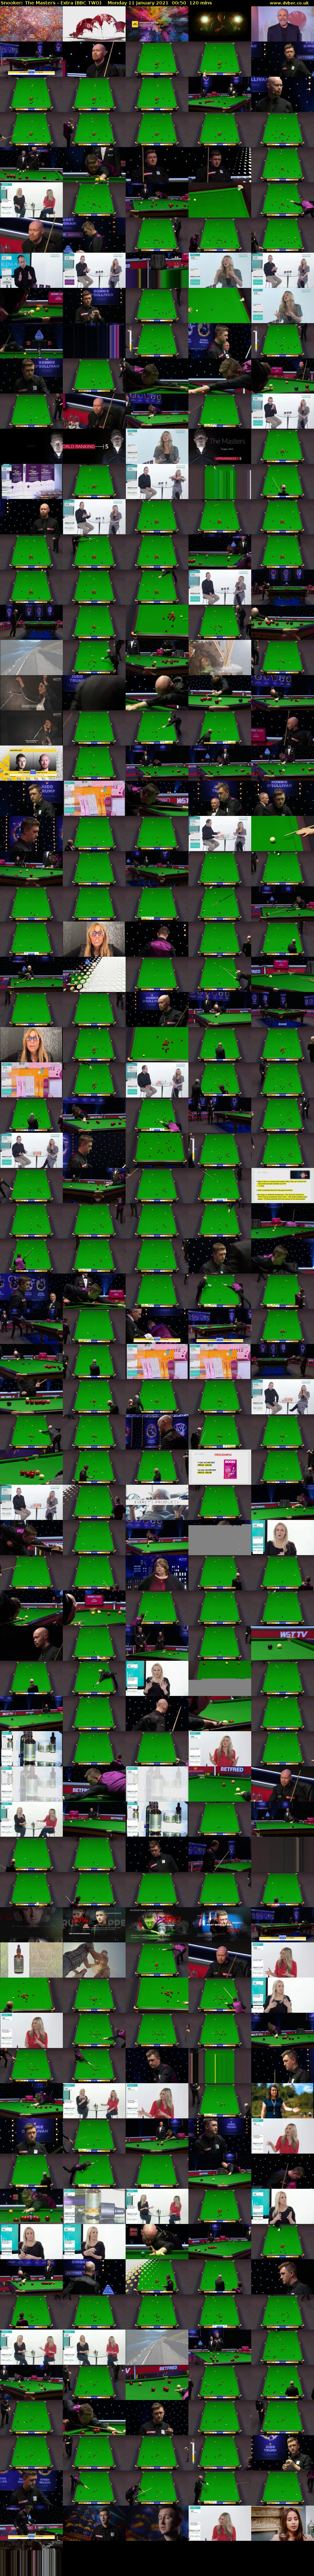 Snooker: The Masters - Extra (BBC TWO) Monday 11 January 2021 00:50 - 02:50